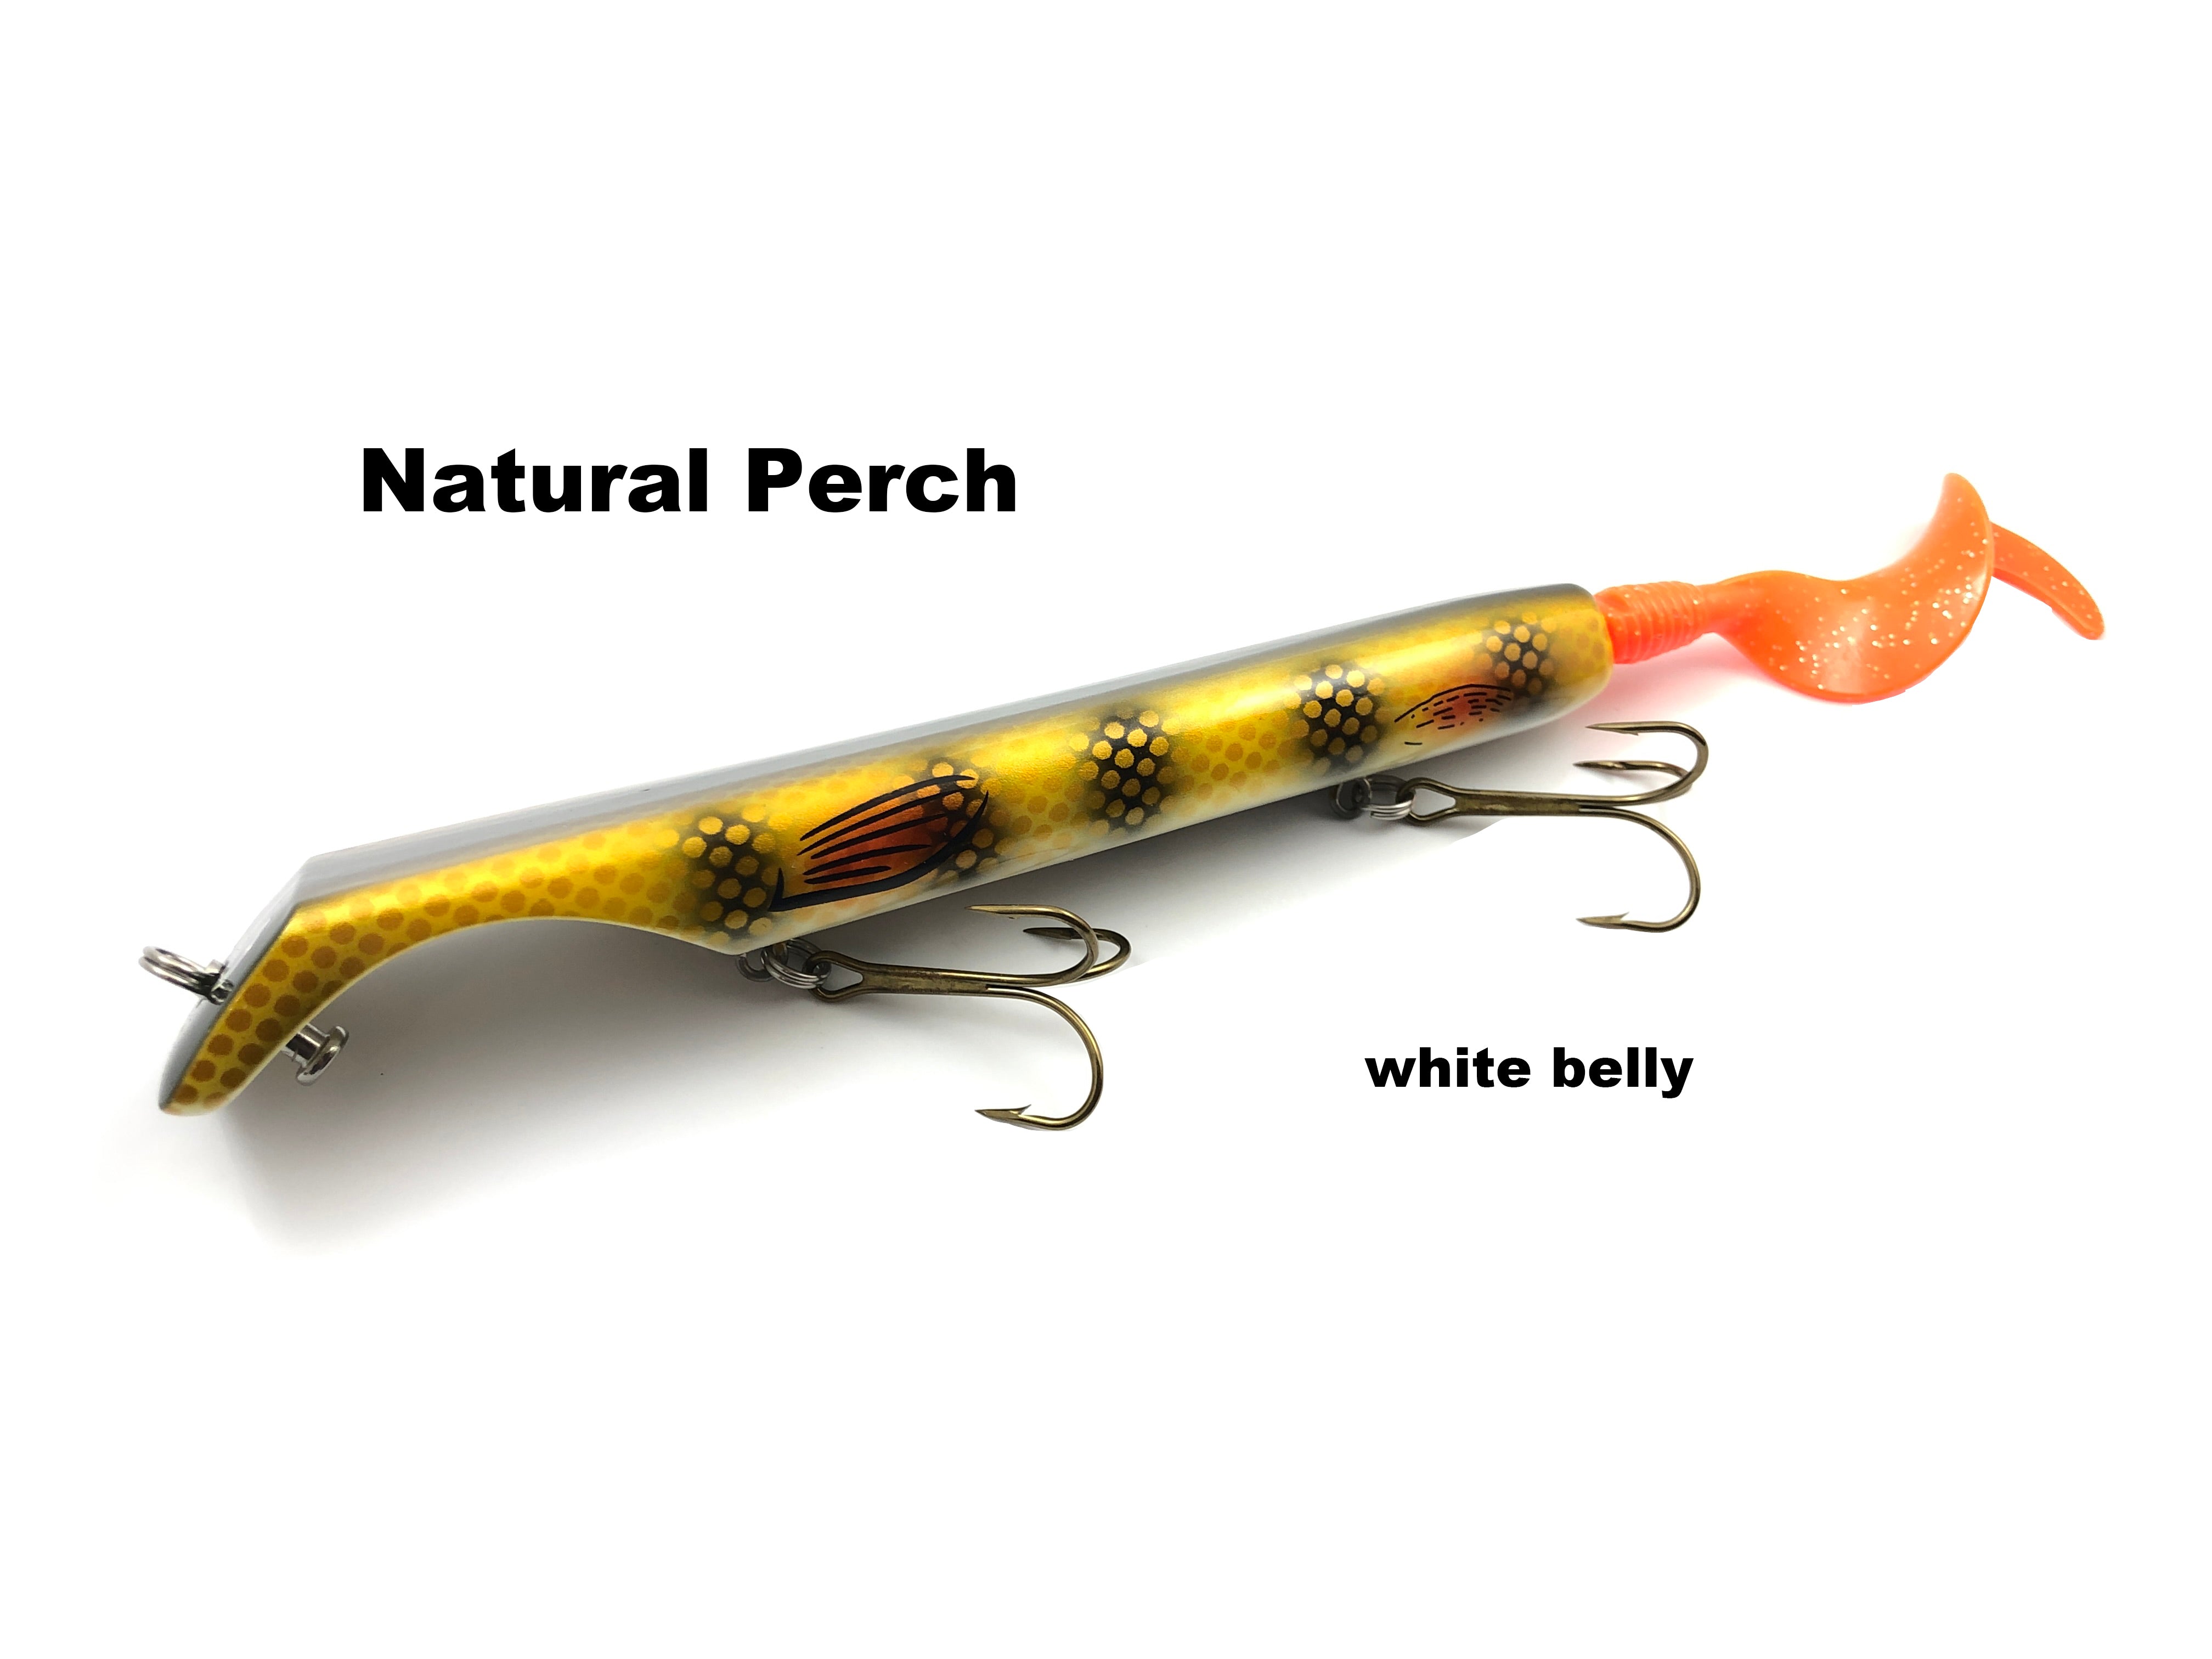 Freshwater Ultralight Lure Fishing - Chub, Perch and 2 New Species